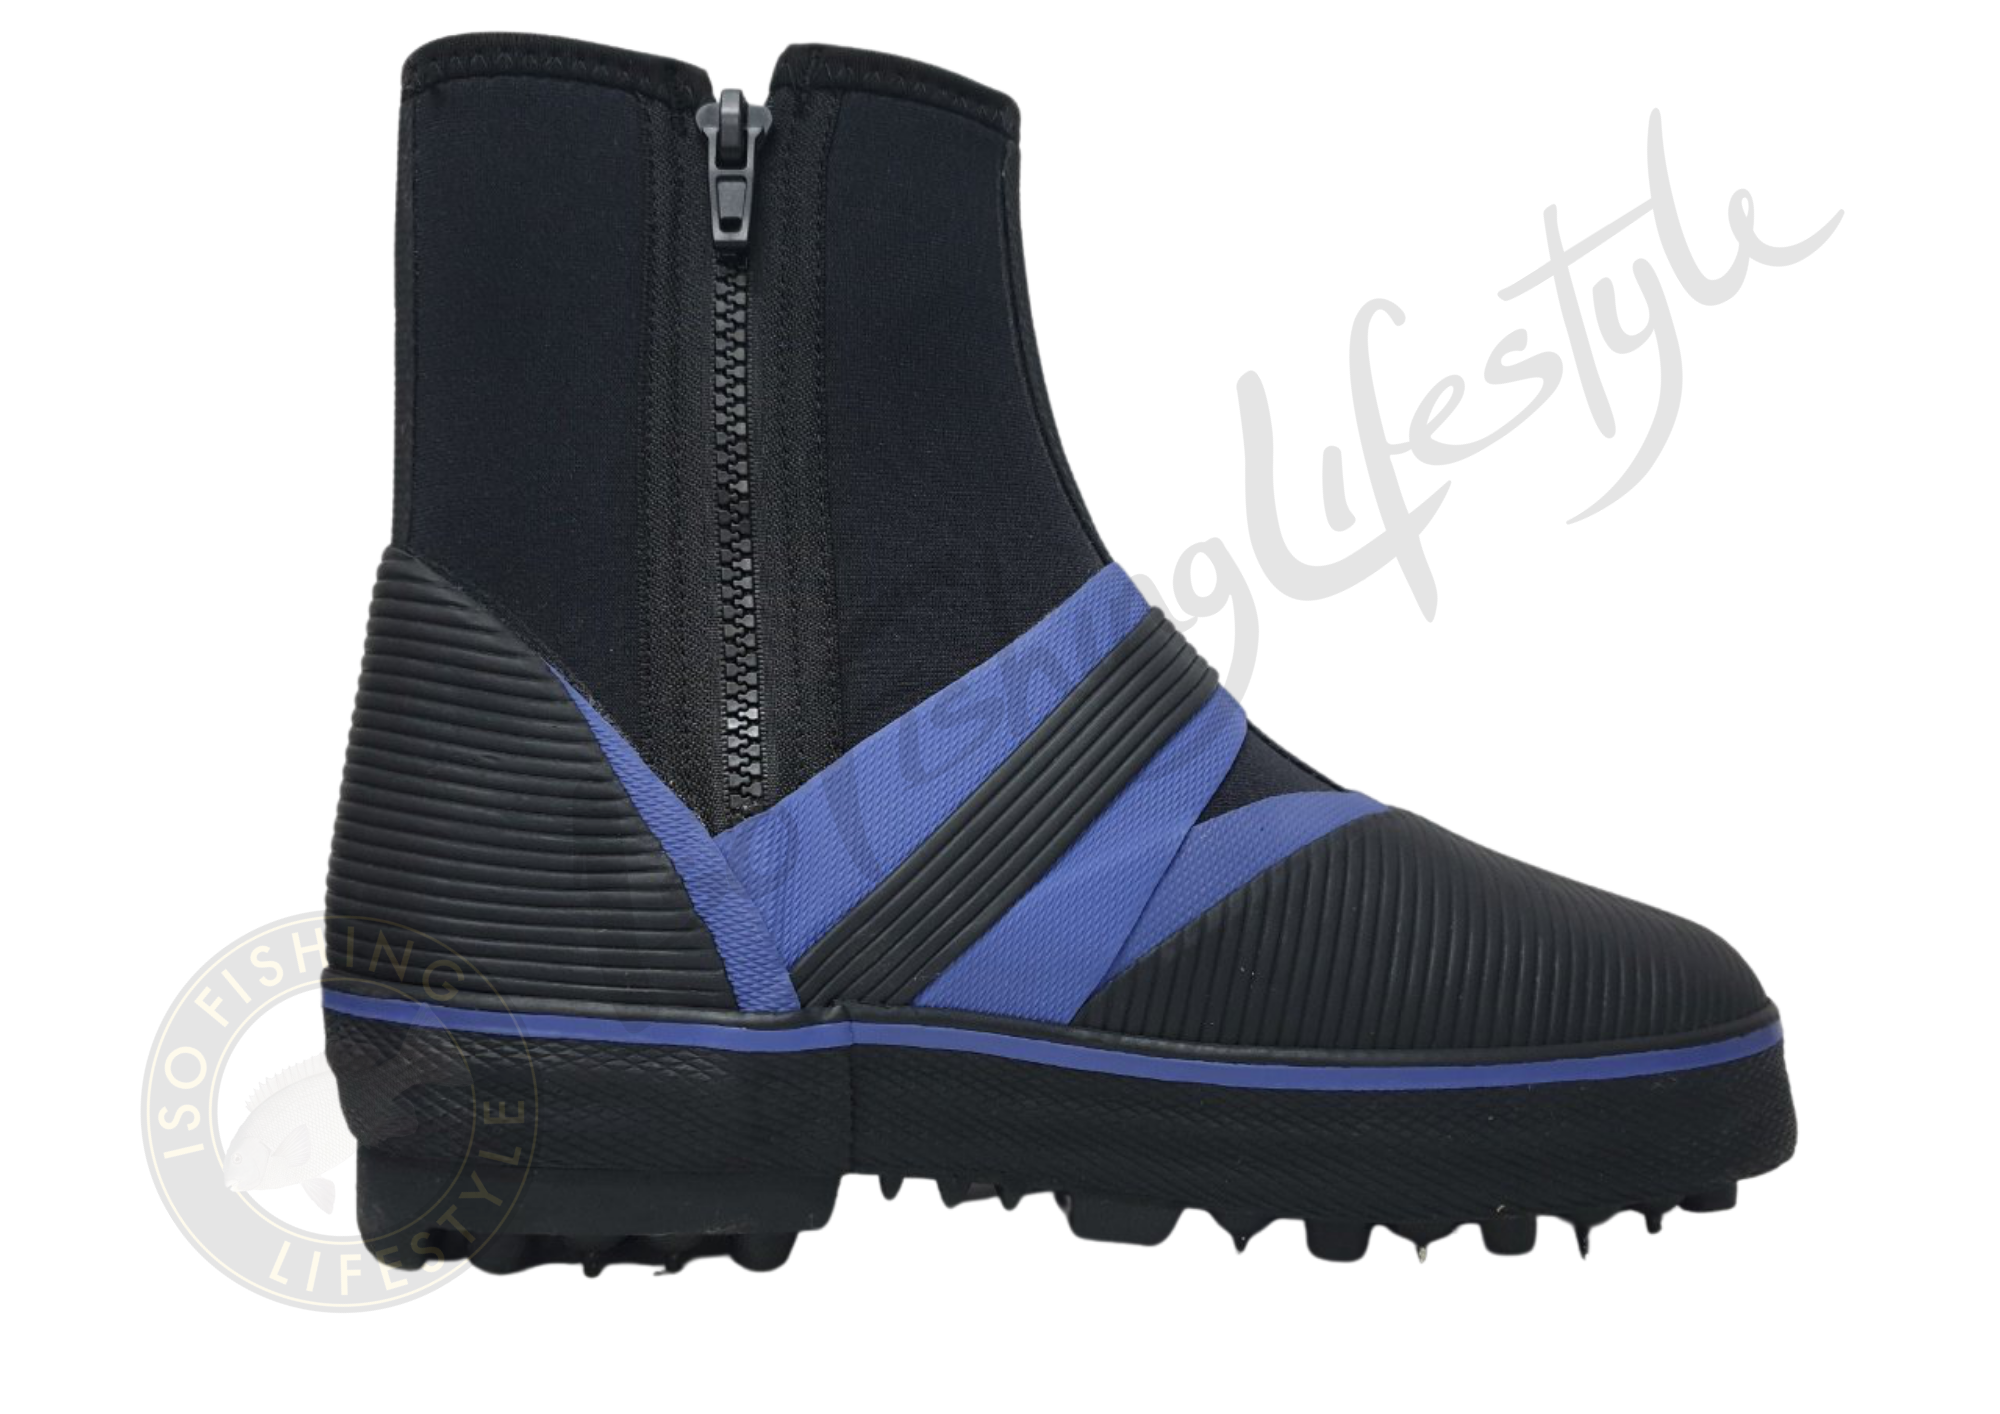 ICatch Rock Fishing Boots With Spikes